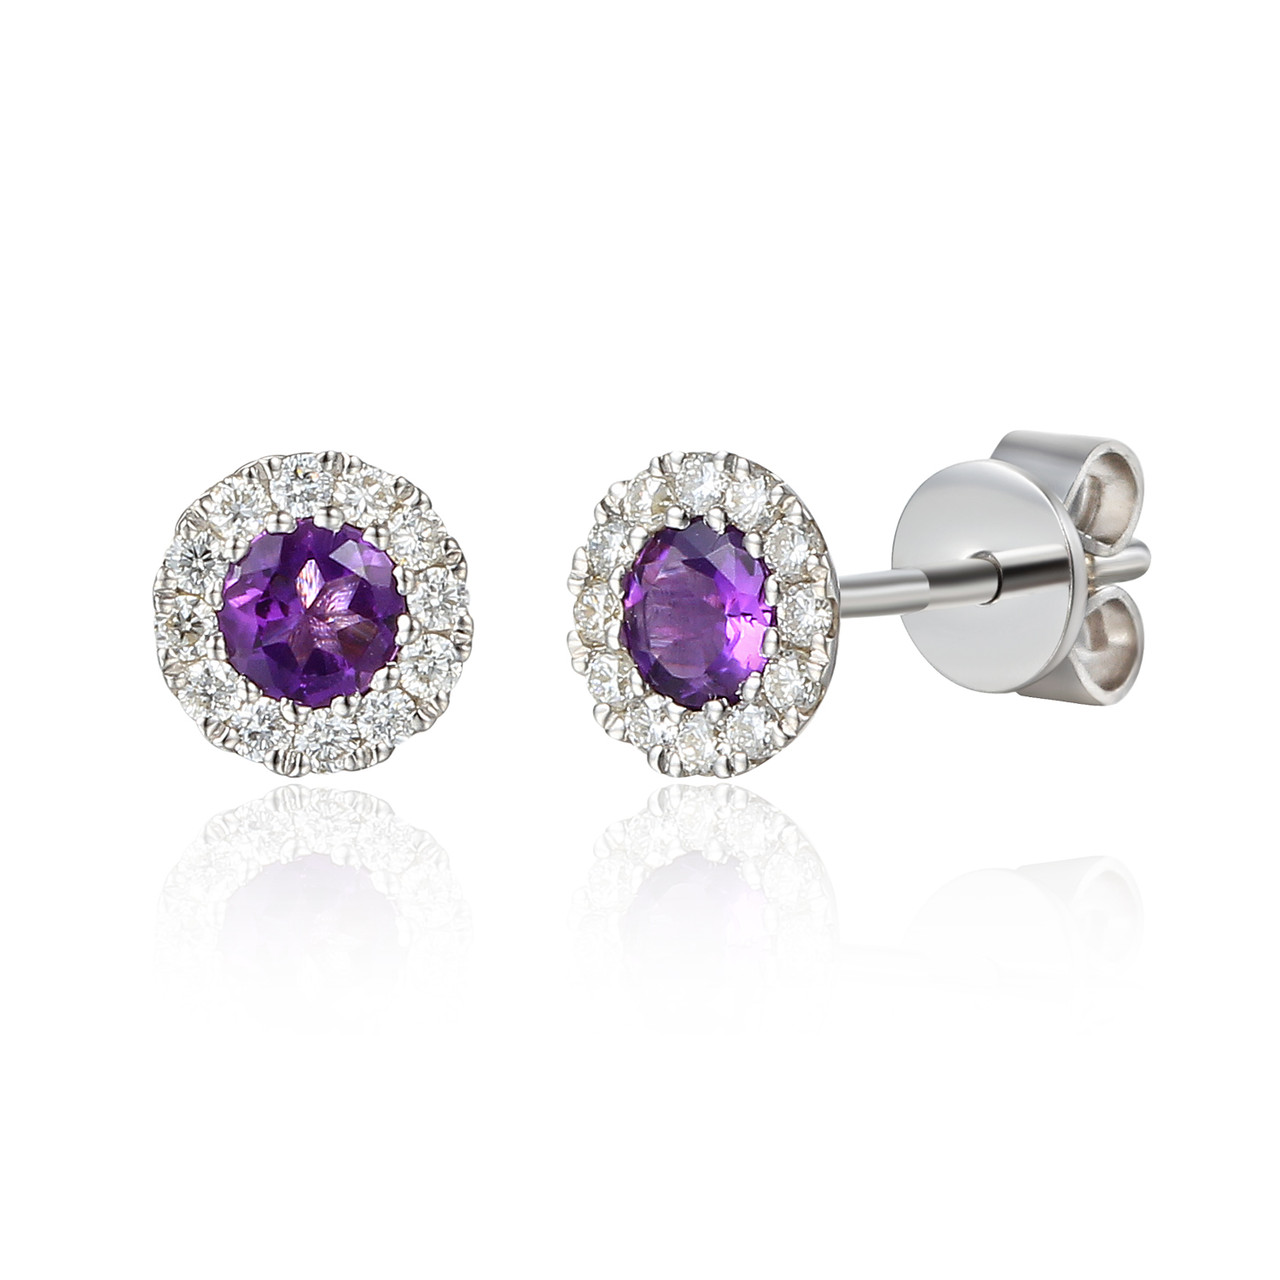 David Yurman Petite Chatelaine Pave Bezel Stud Earrings with Amethyst and  Diamonds | Lee Michaels Fine Jewelry stores